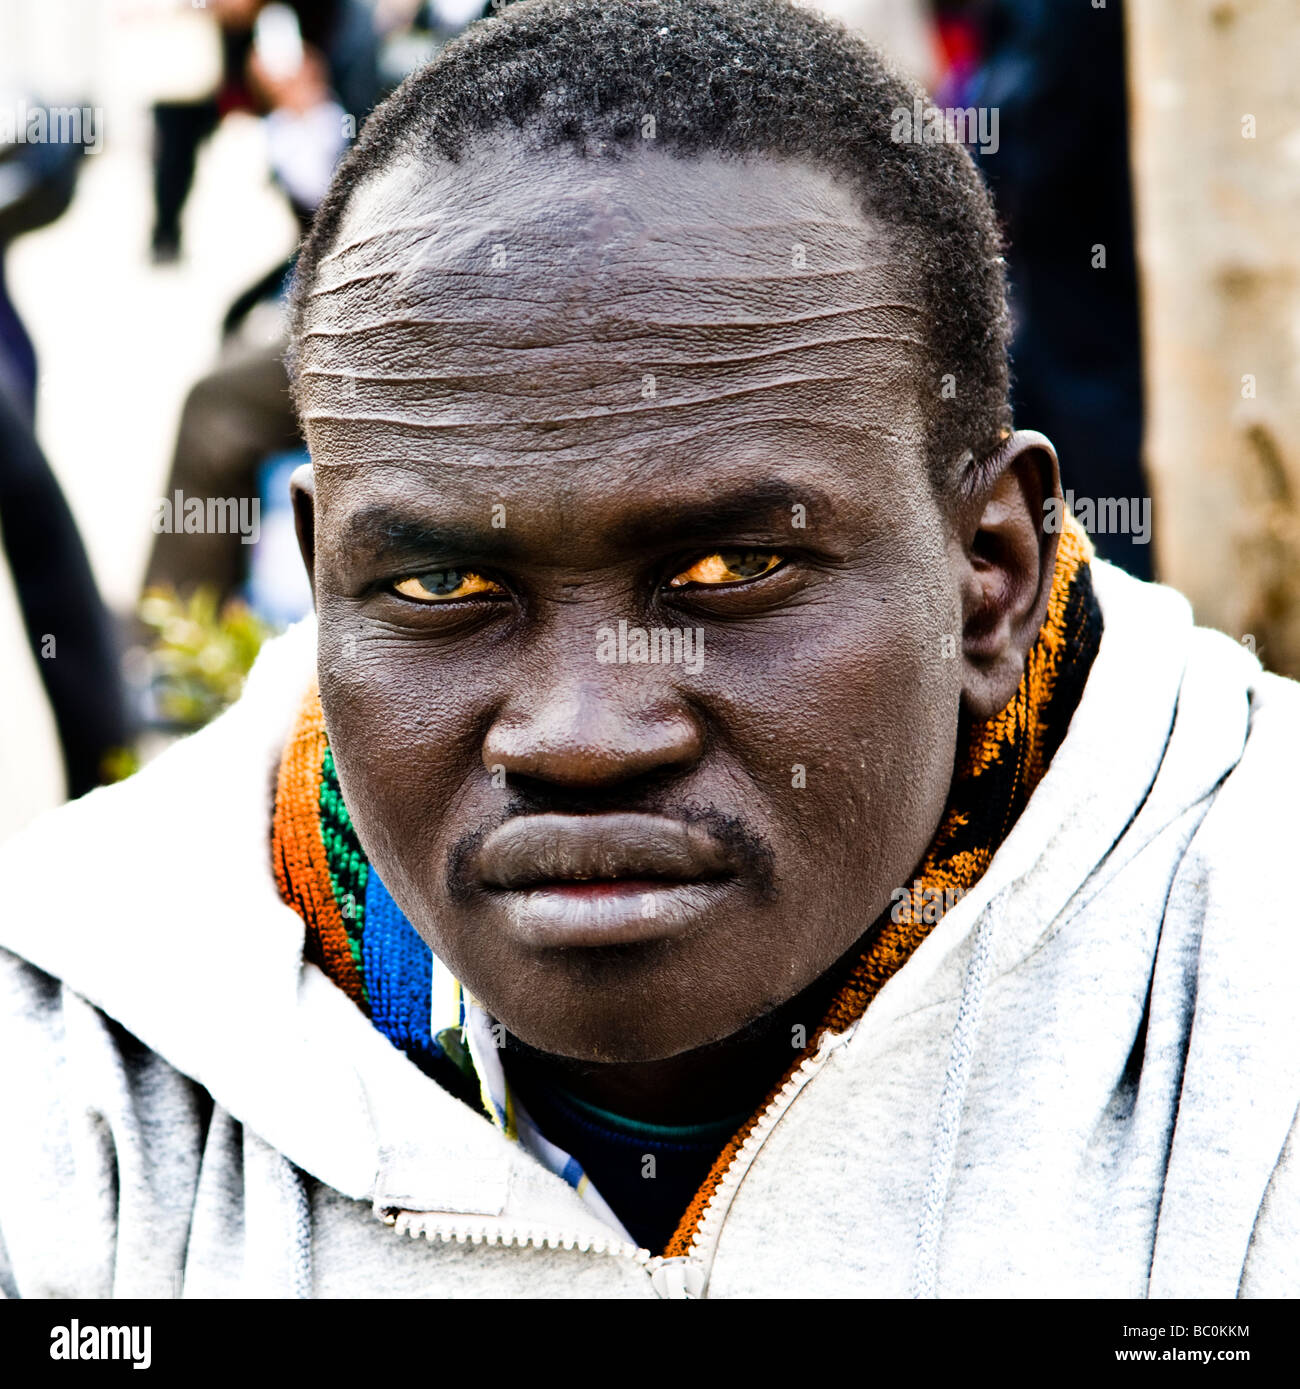 Portrait of a Nuer man. Stock Photo